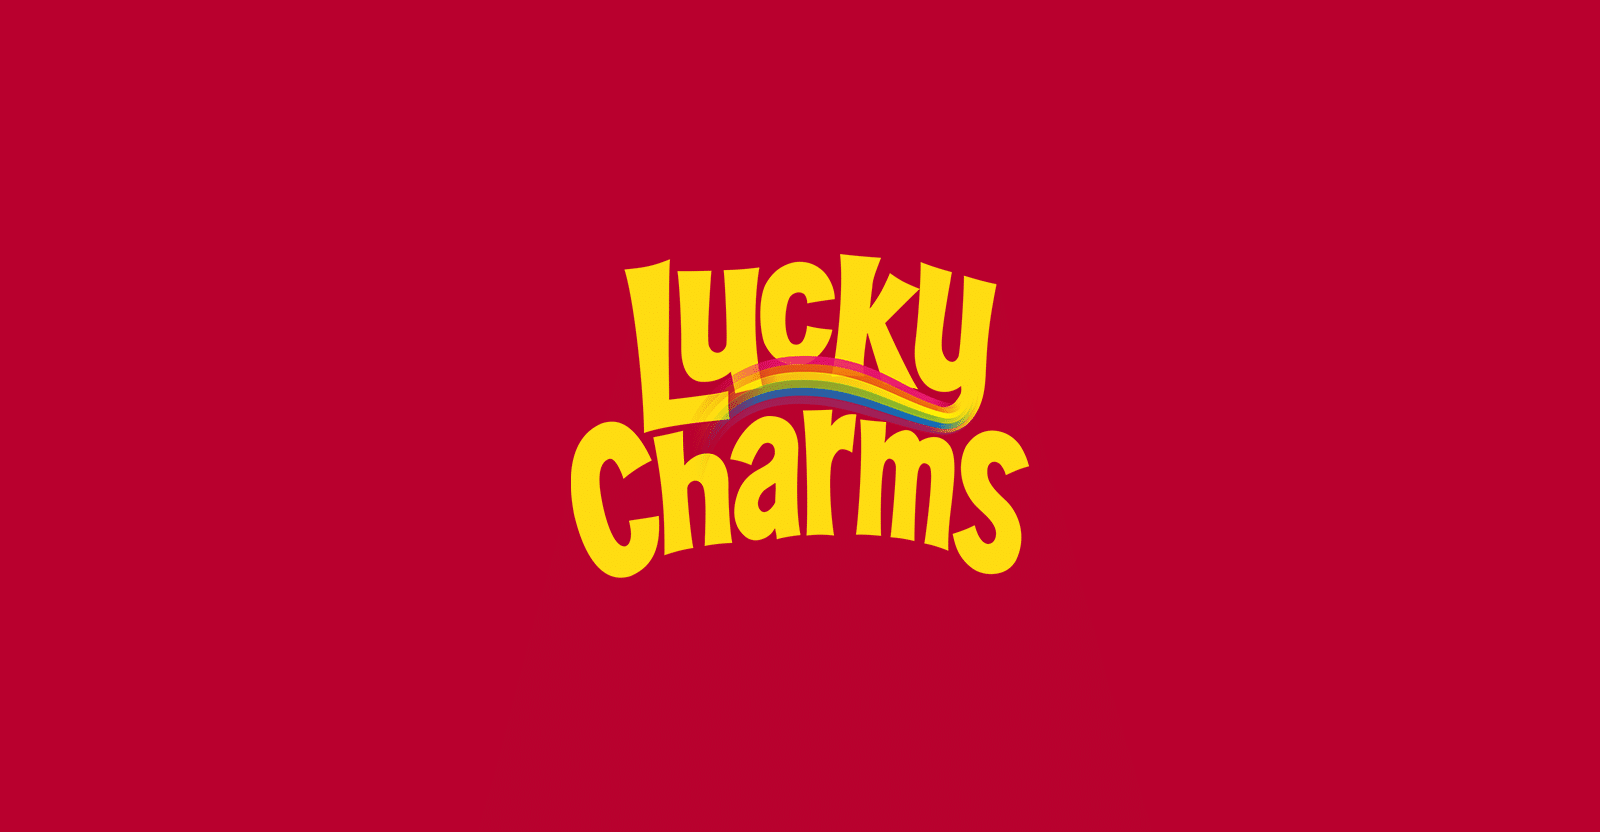 are lucky charms gluten-free